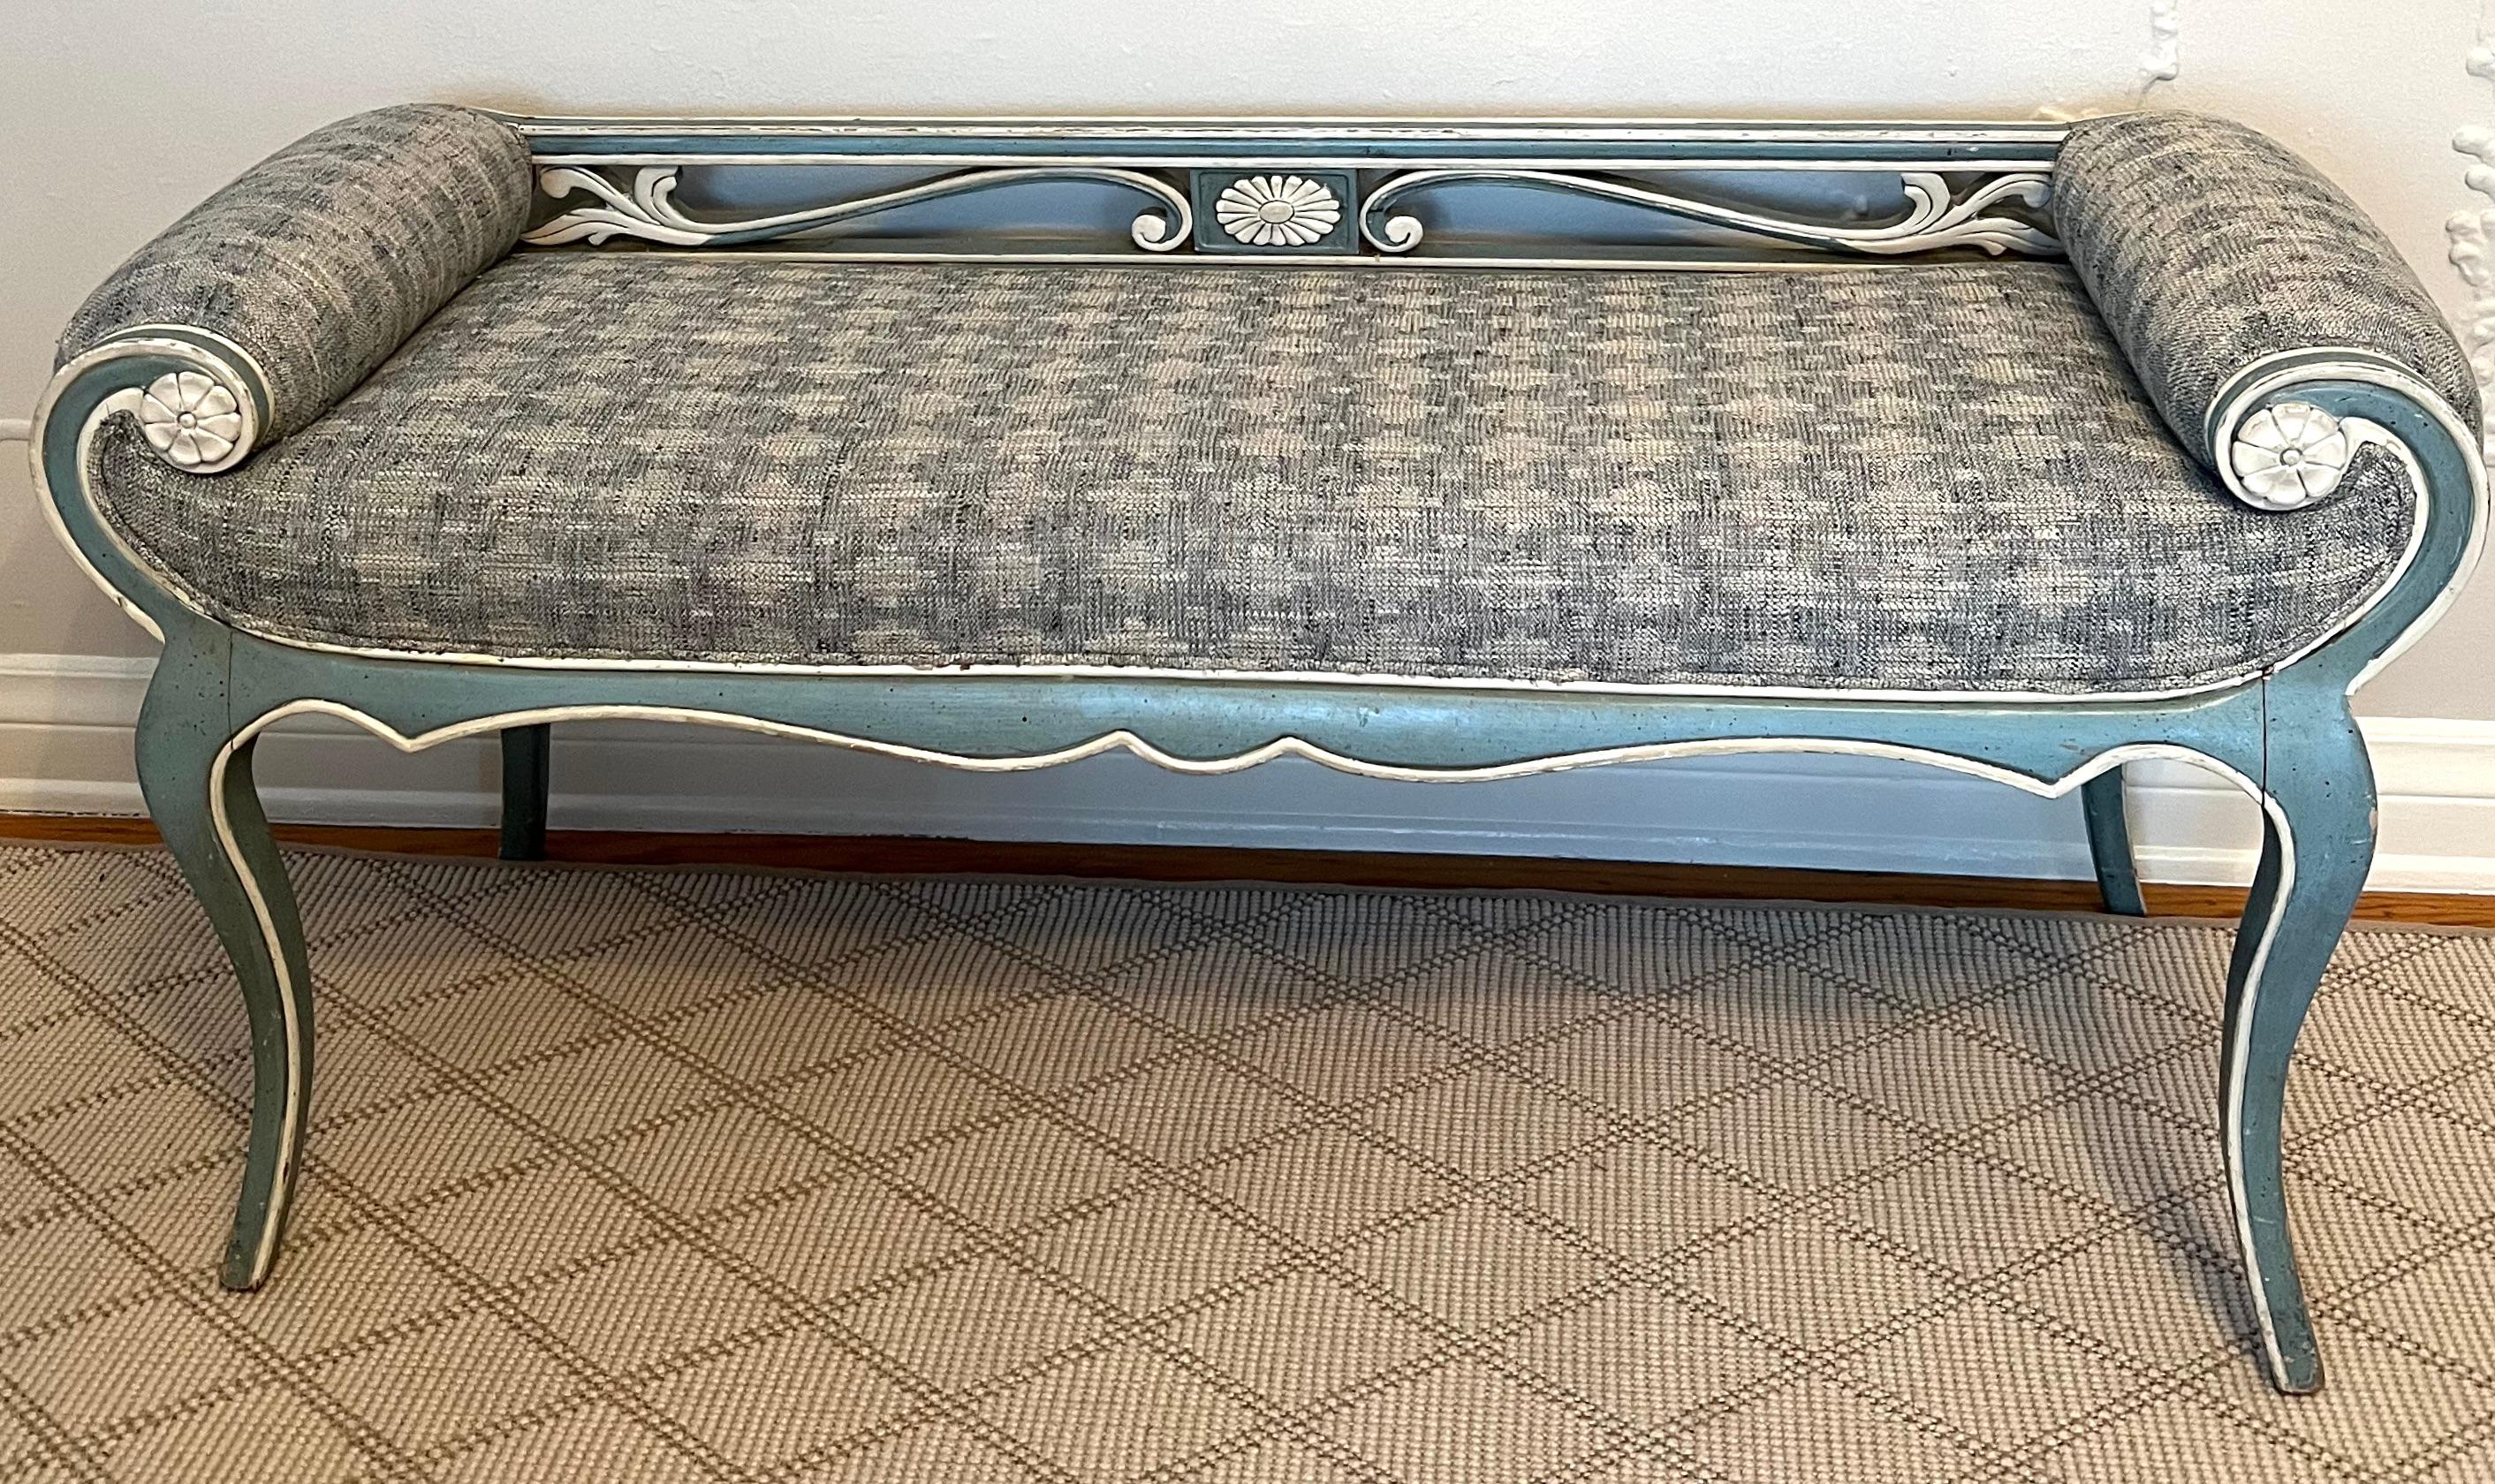 Hand-Crafted Swedish Style Bench with Swedish Blue and White Trim Frame and Curved Arms